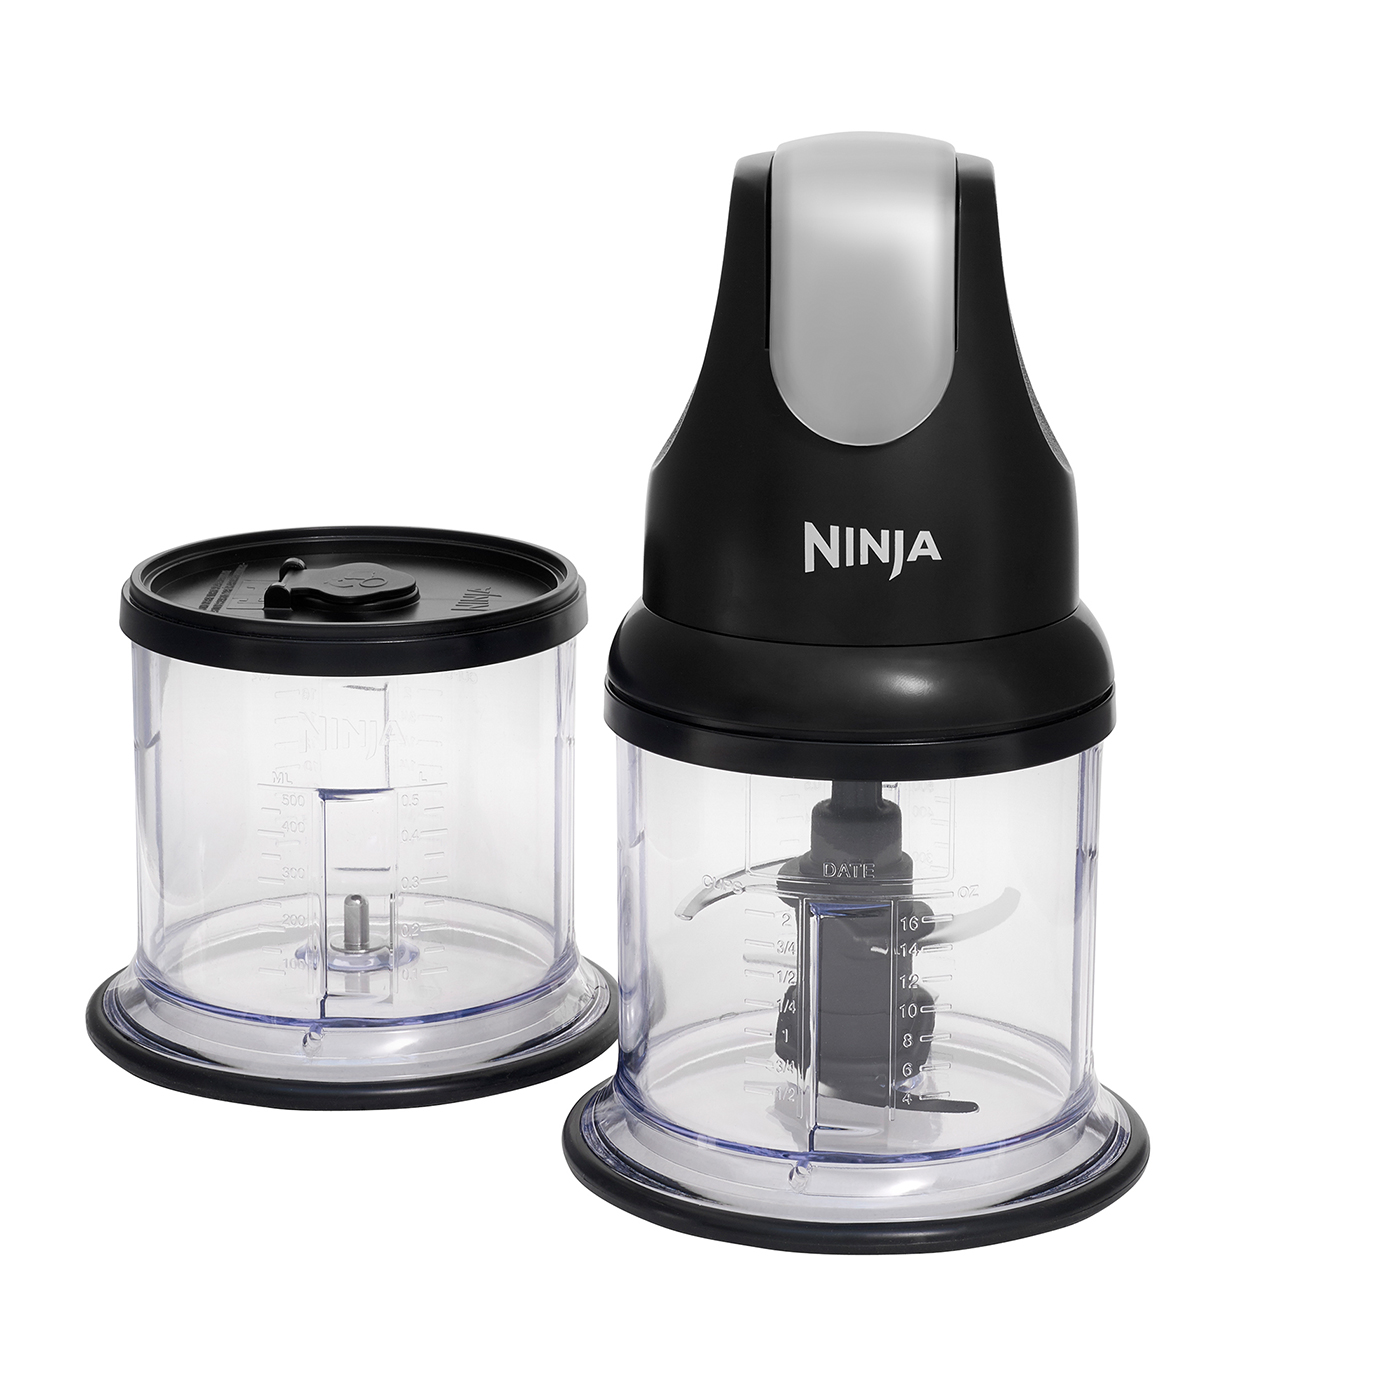 Official Spare Parts & Accessories - Ninja UK